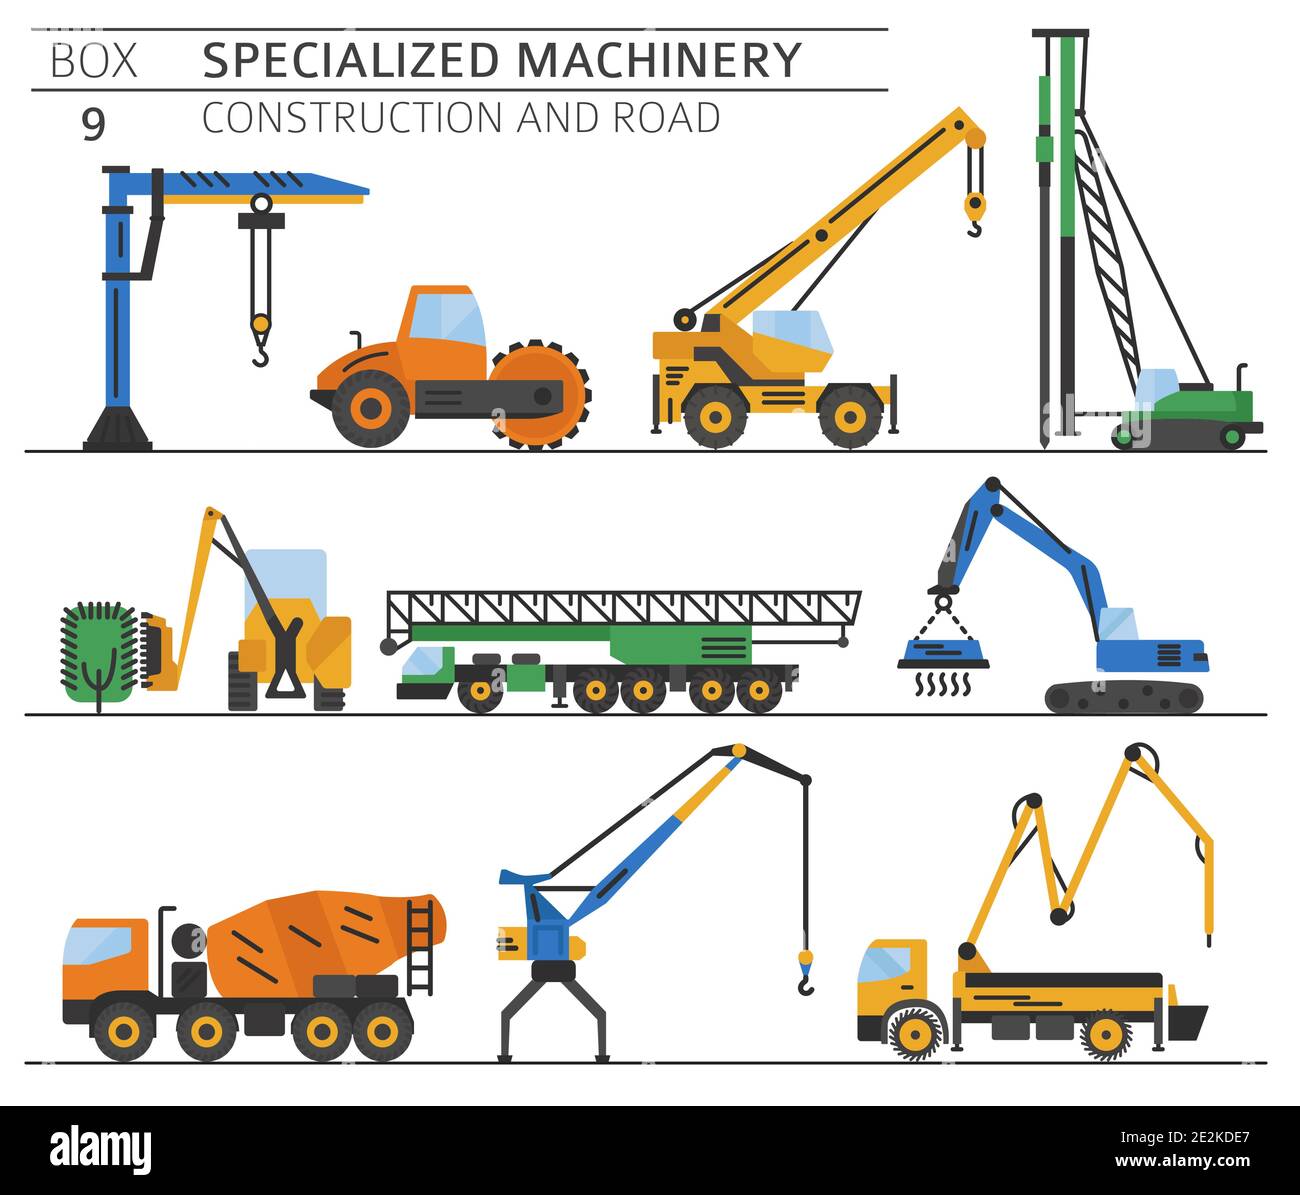 Special industrial construction and road machine coloured vector icon set isolated on white. Illustration Stock Vector